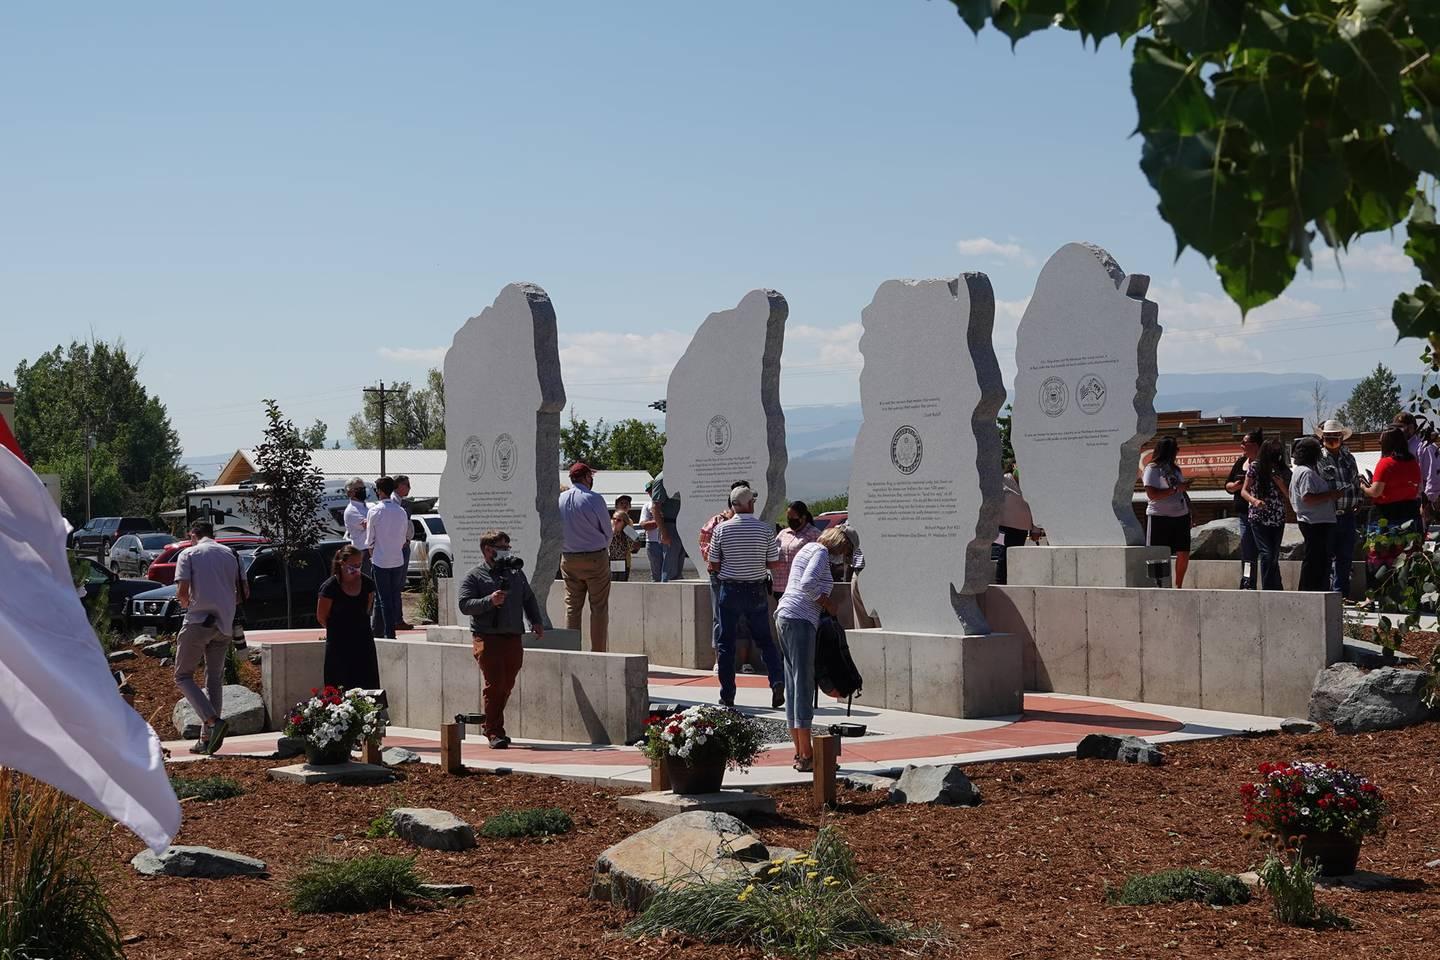 The Path of Honor memorial pictured here in an Aug. 12, 2021, photo posted to the memorial